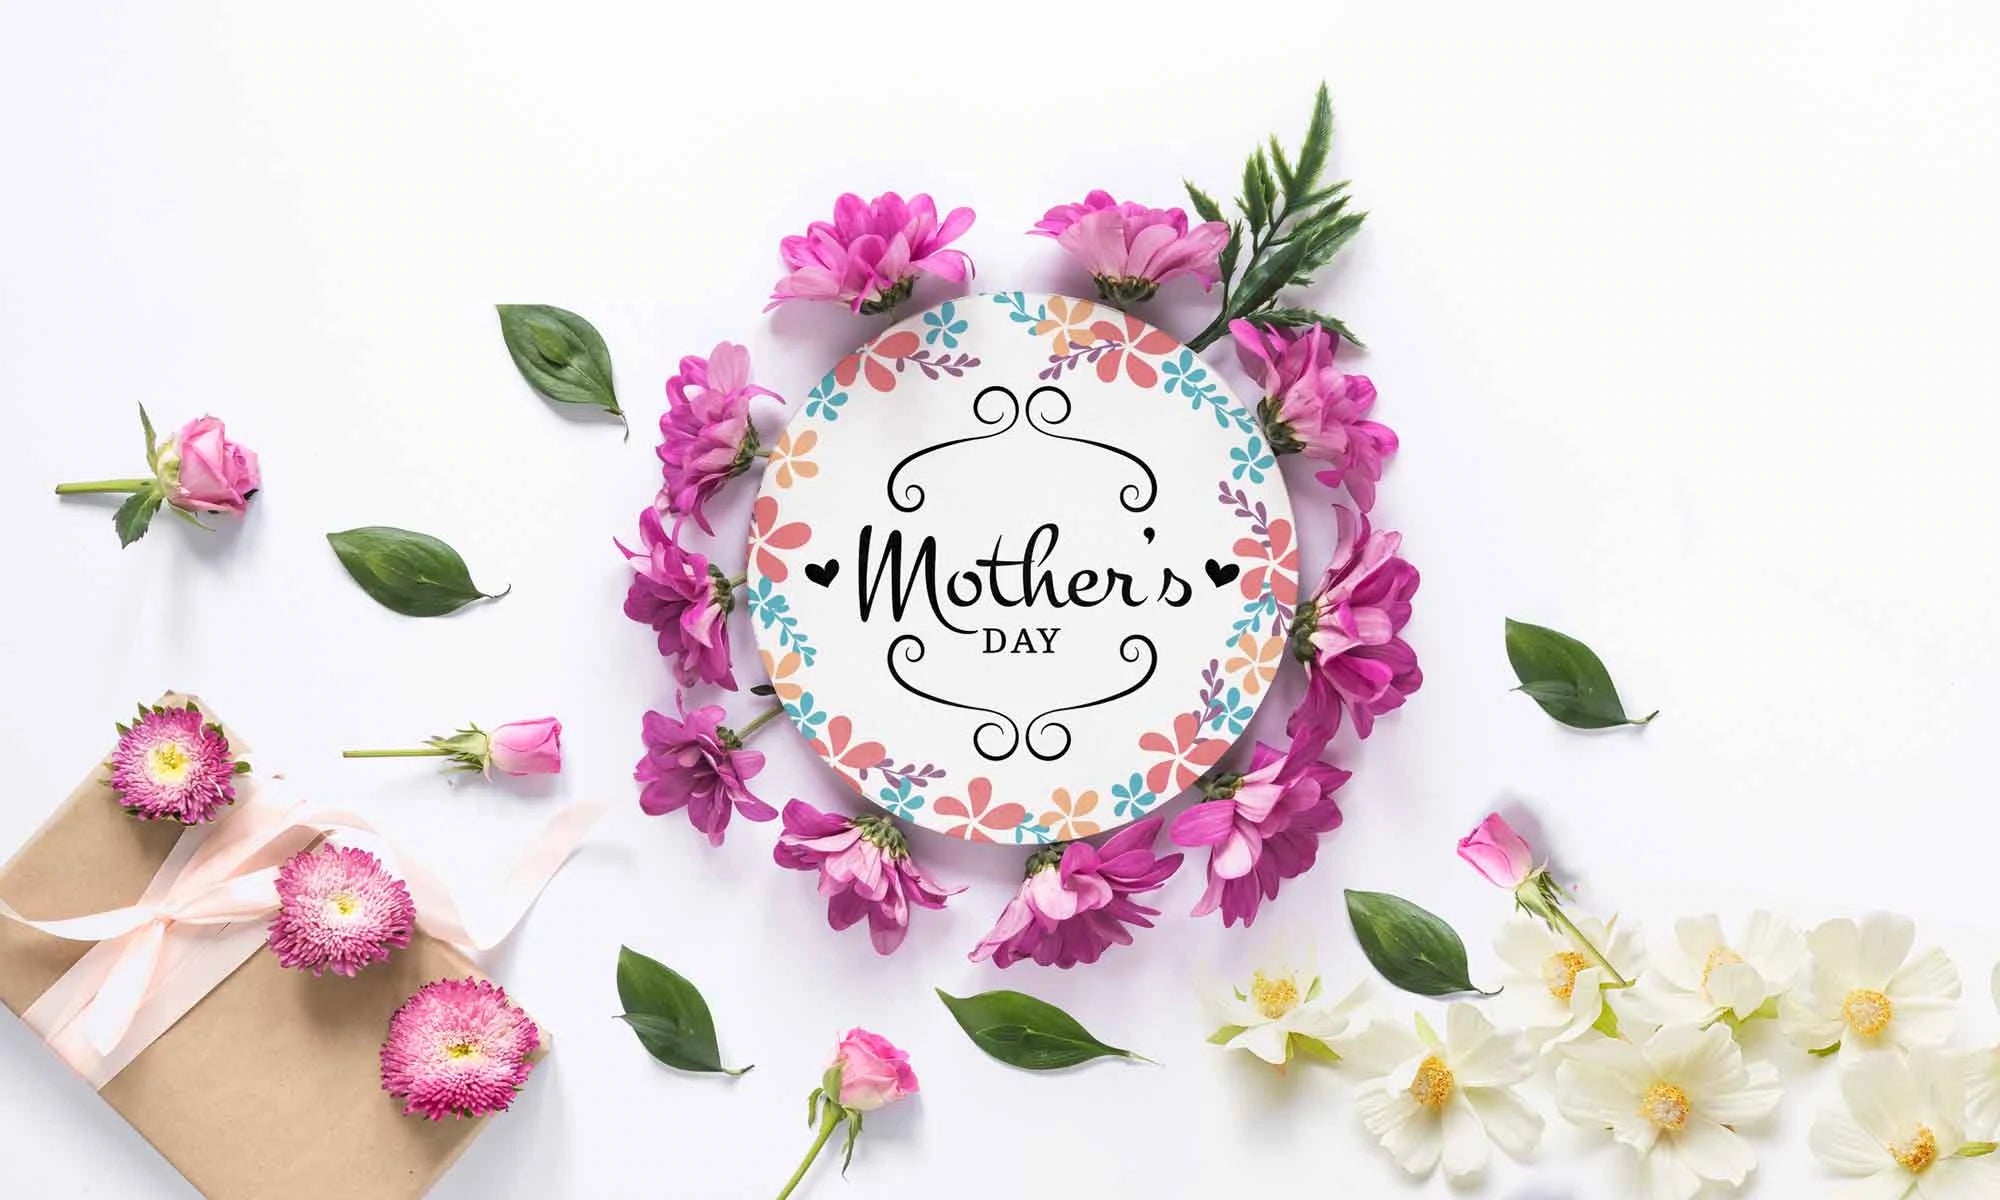 Mother's Day Perfume Gifts